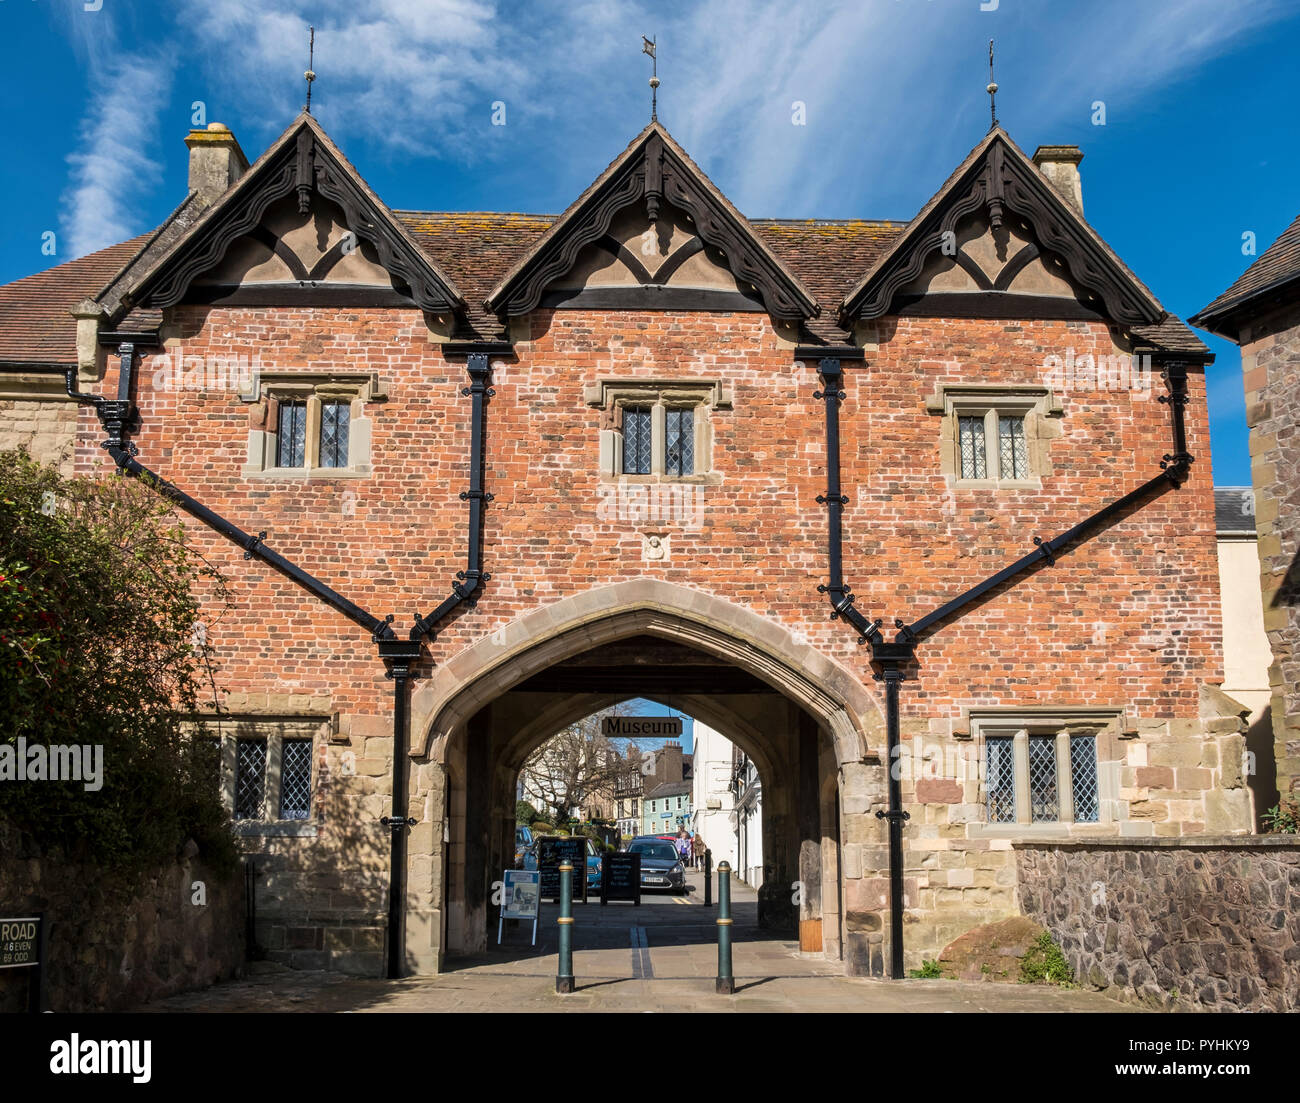 The Abbey Gateway now the Museum, Great Malvern, Worcestershire, England, Europe Stock Photo